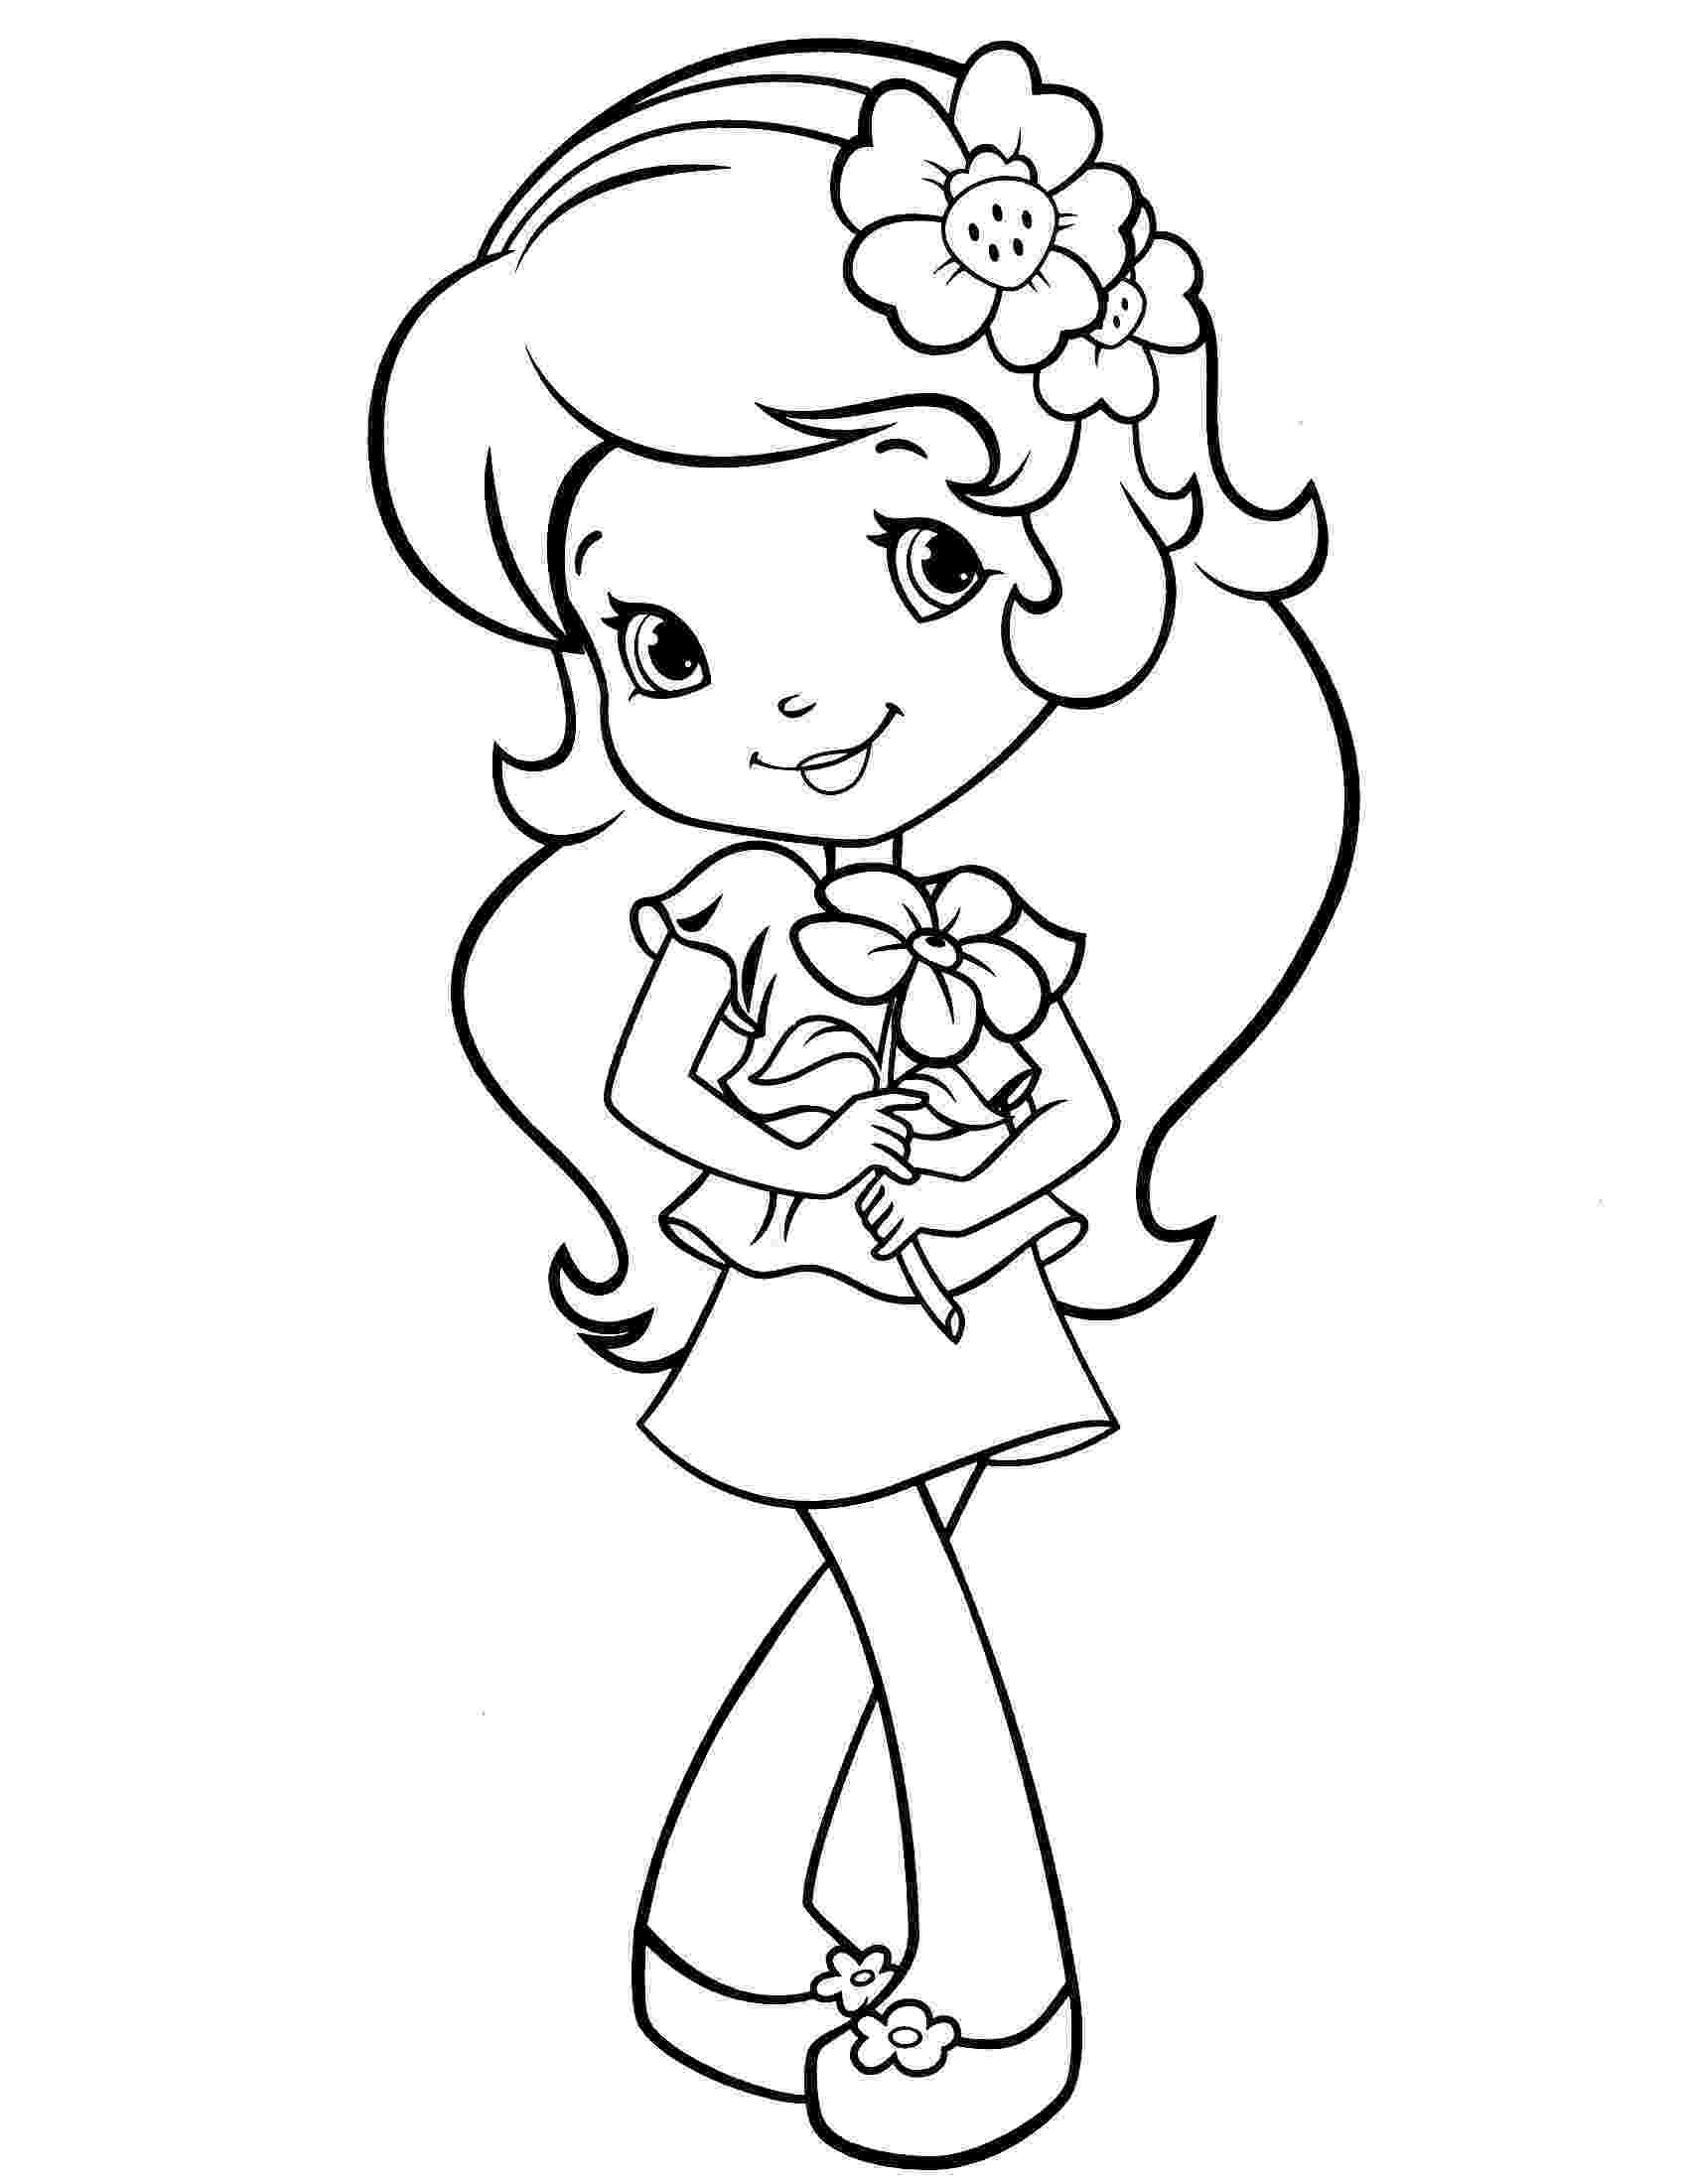 pictures of strawberry shortcake strawberry shortcake coloring page dibujos de shortcake strawberry pictures of 